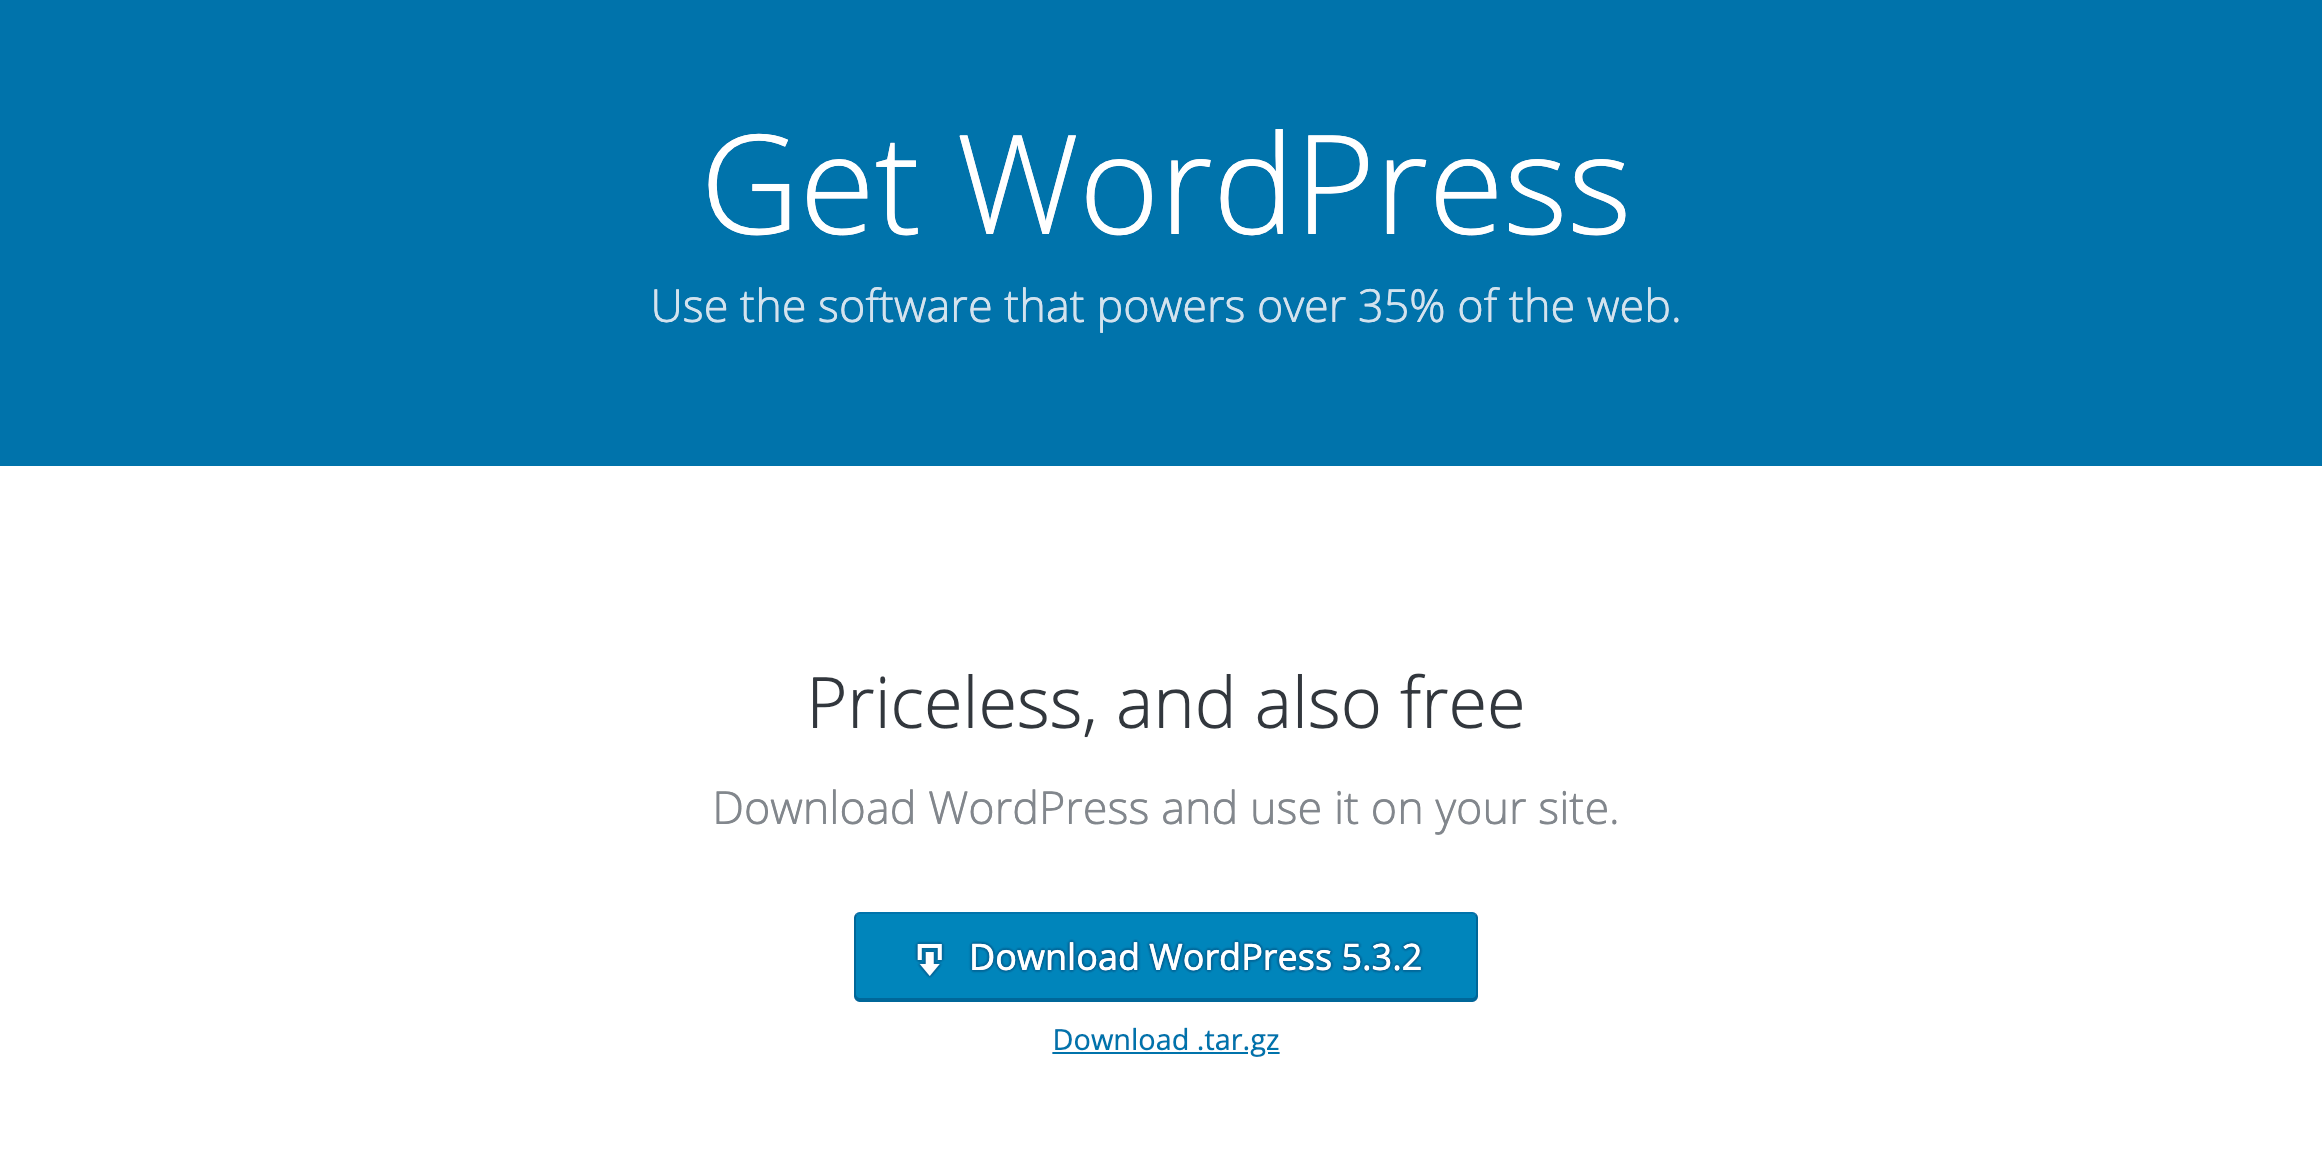 The WordPress Download page.